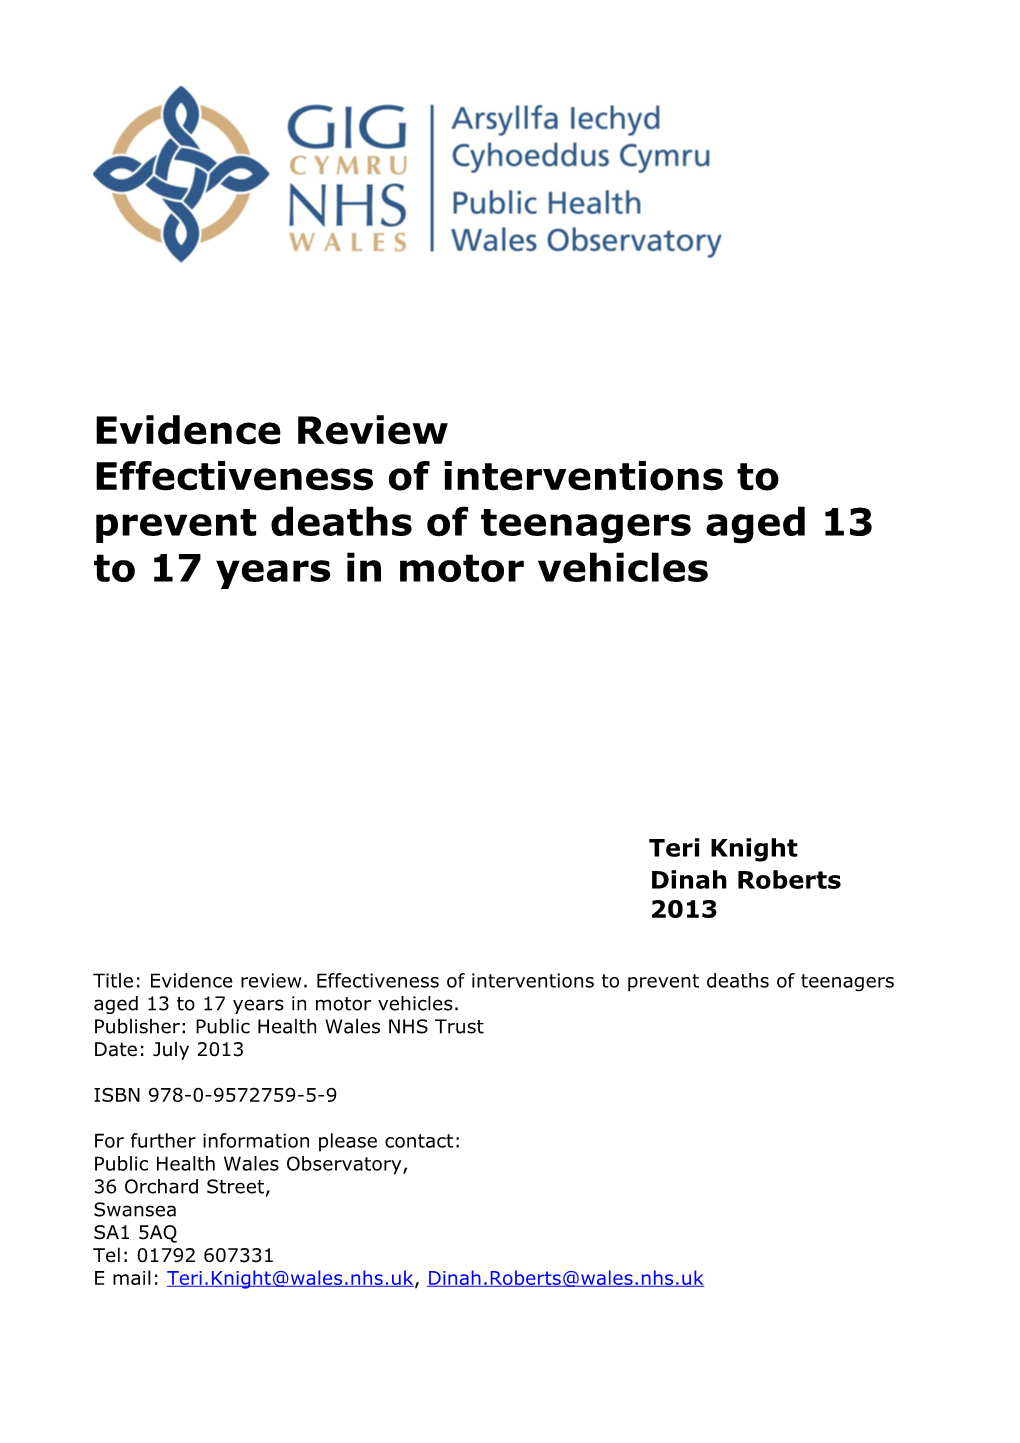 Effectiveness of Interventions to Prevent Deaths of Teenagers Aged 13 To17years in Motor